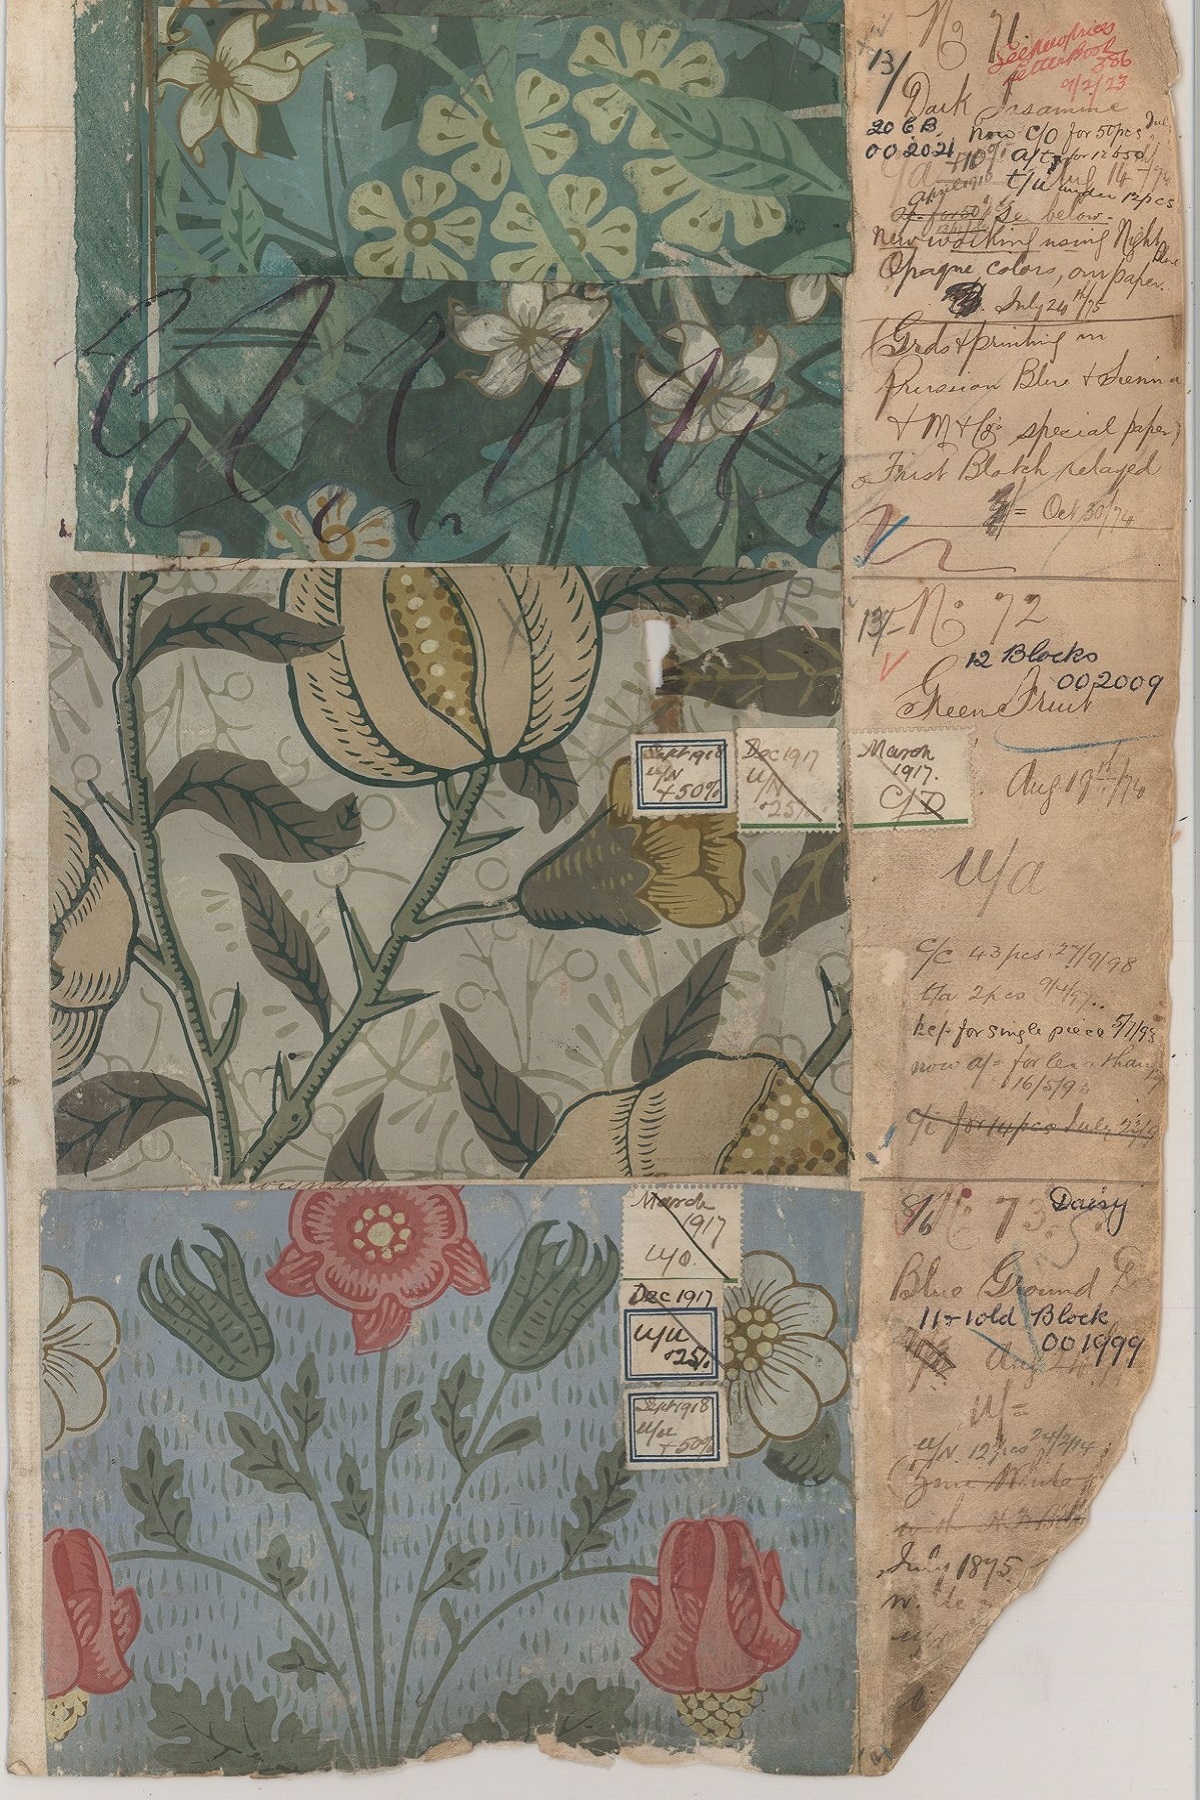 Morris & Co. log book with original samples of William Morris's designs for hand-printed wallpapers: Jasmine (1872), Fruit (1866), and Daisy (1864). Daisy was the first of Morris's wallpaper designs to be printed.